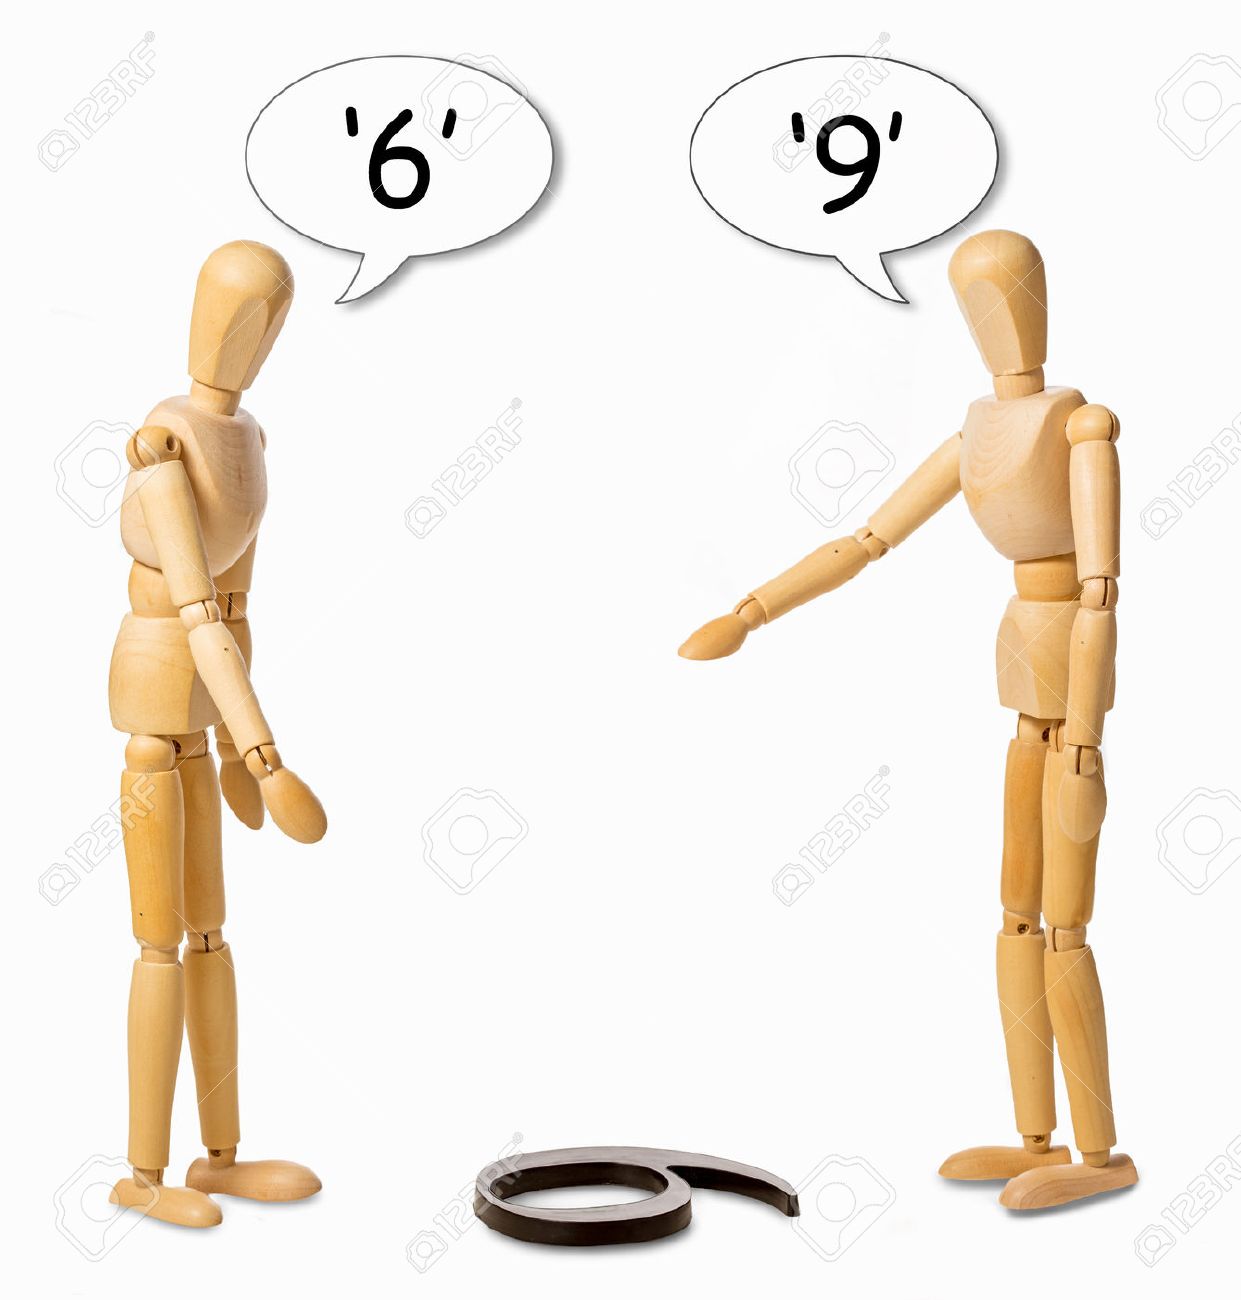 33890957-two-mannikins-arguing-whether-a-number-on-the-floor-is-a-6-or-a-9